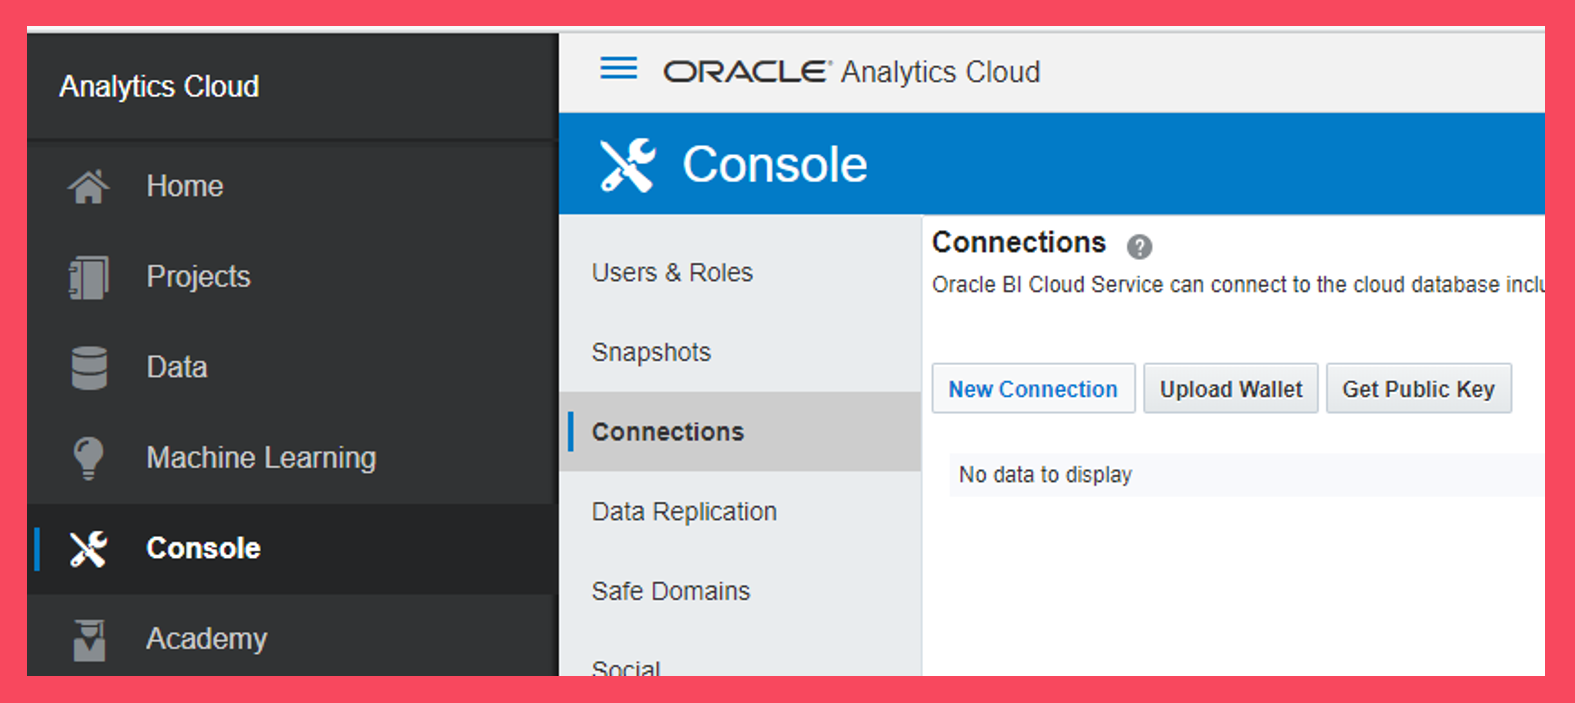 setting-up-oracle-analytics-cloud-step-4-oracle-analytics-cloud-create-a-data-source